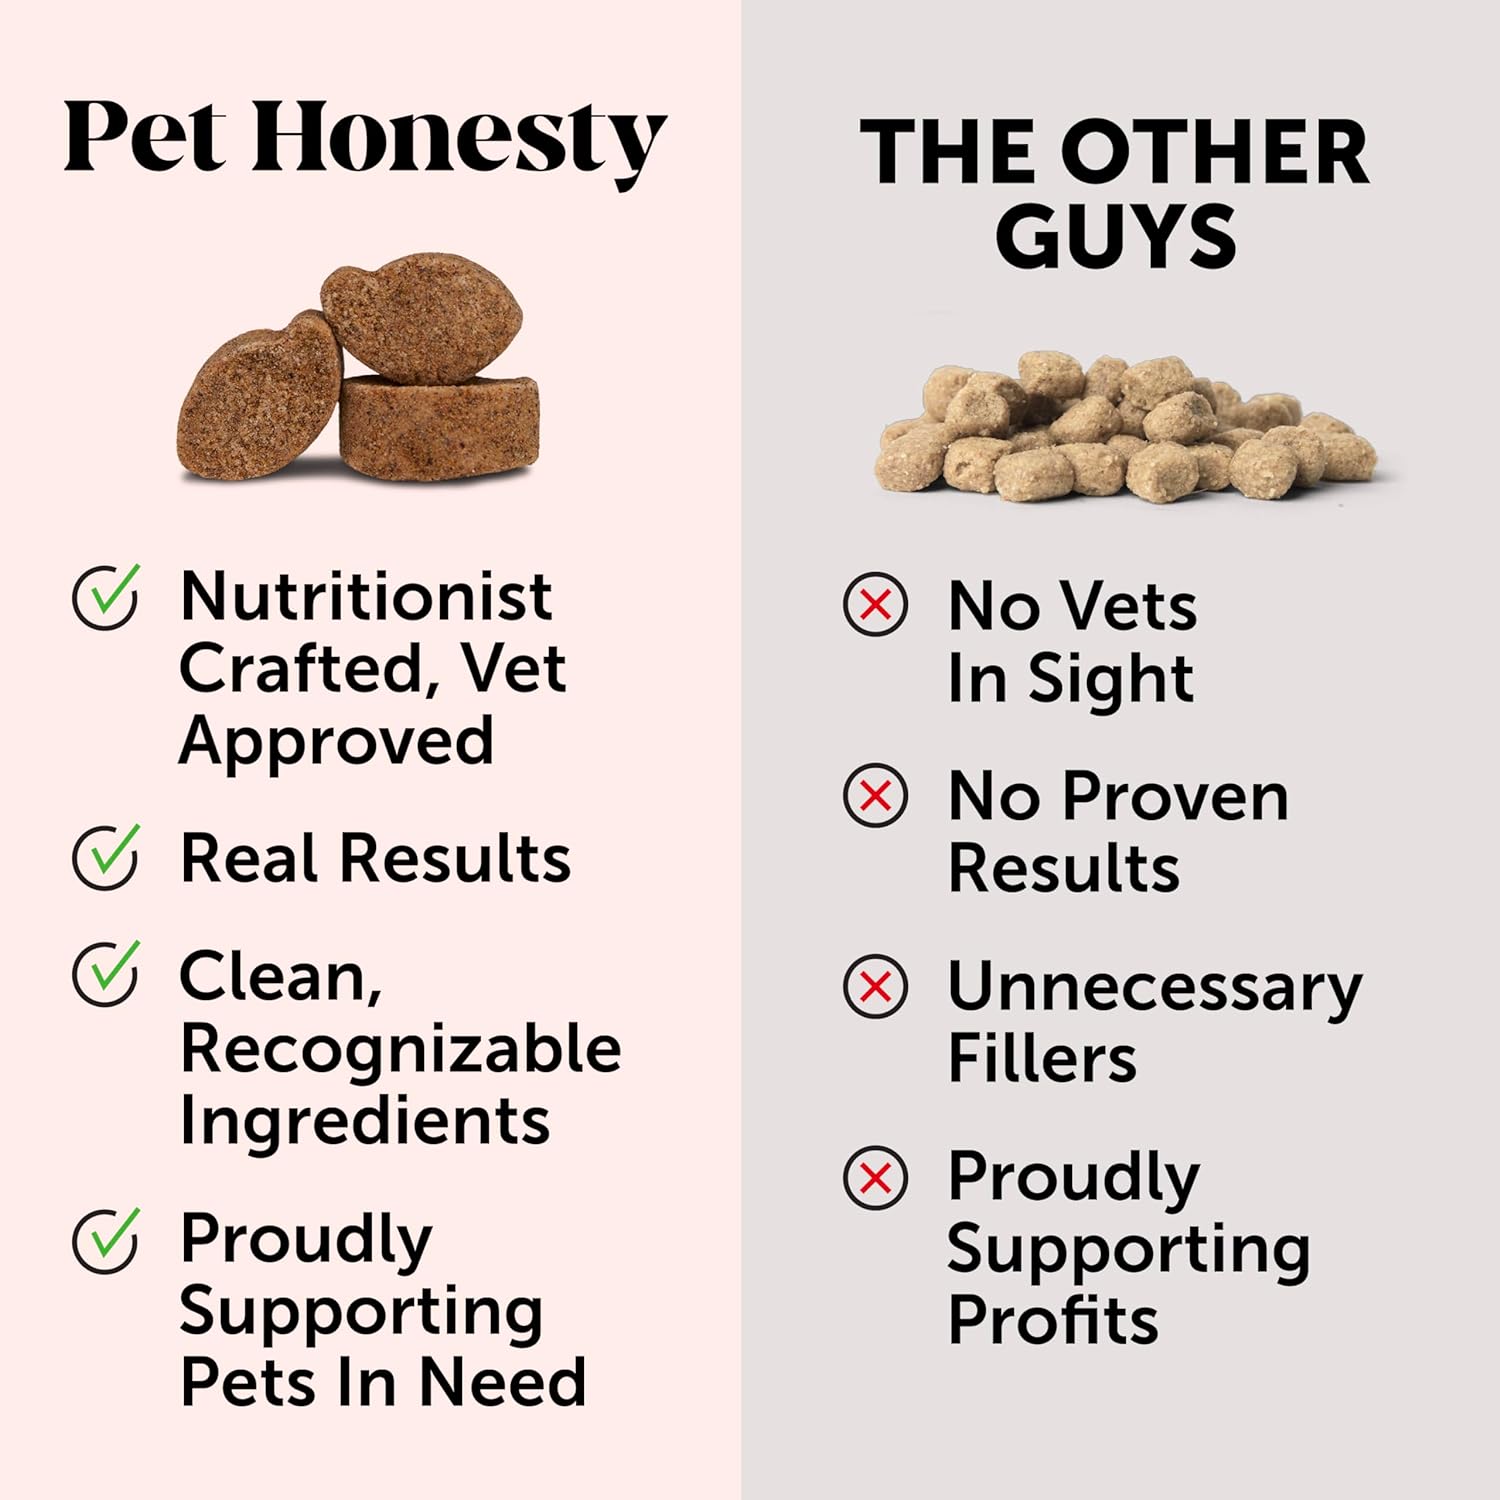 Pet Honesty Salmon Skin Health - Itch Relief for Dogs, Omega 3 Fish Oil for Dogs, Natural Salmon Oil for Dogs Chews for Healthy Skin & Coat, May Reduce Shedding, Dog Fish Oil Supplements - (90 Ct) : Pet Supplies